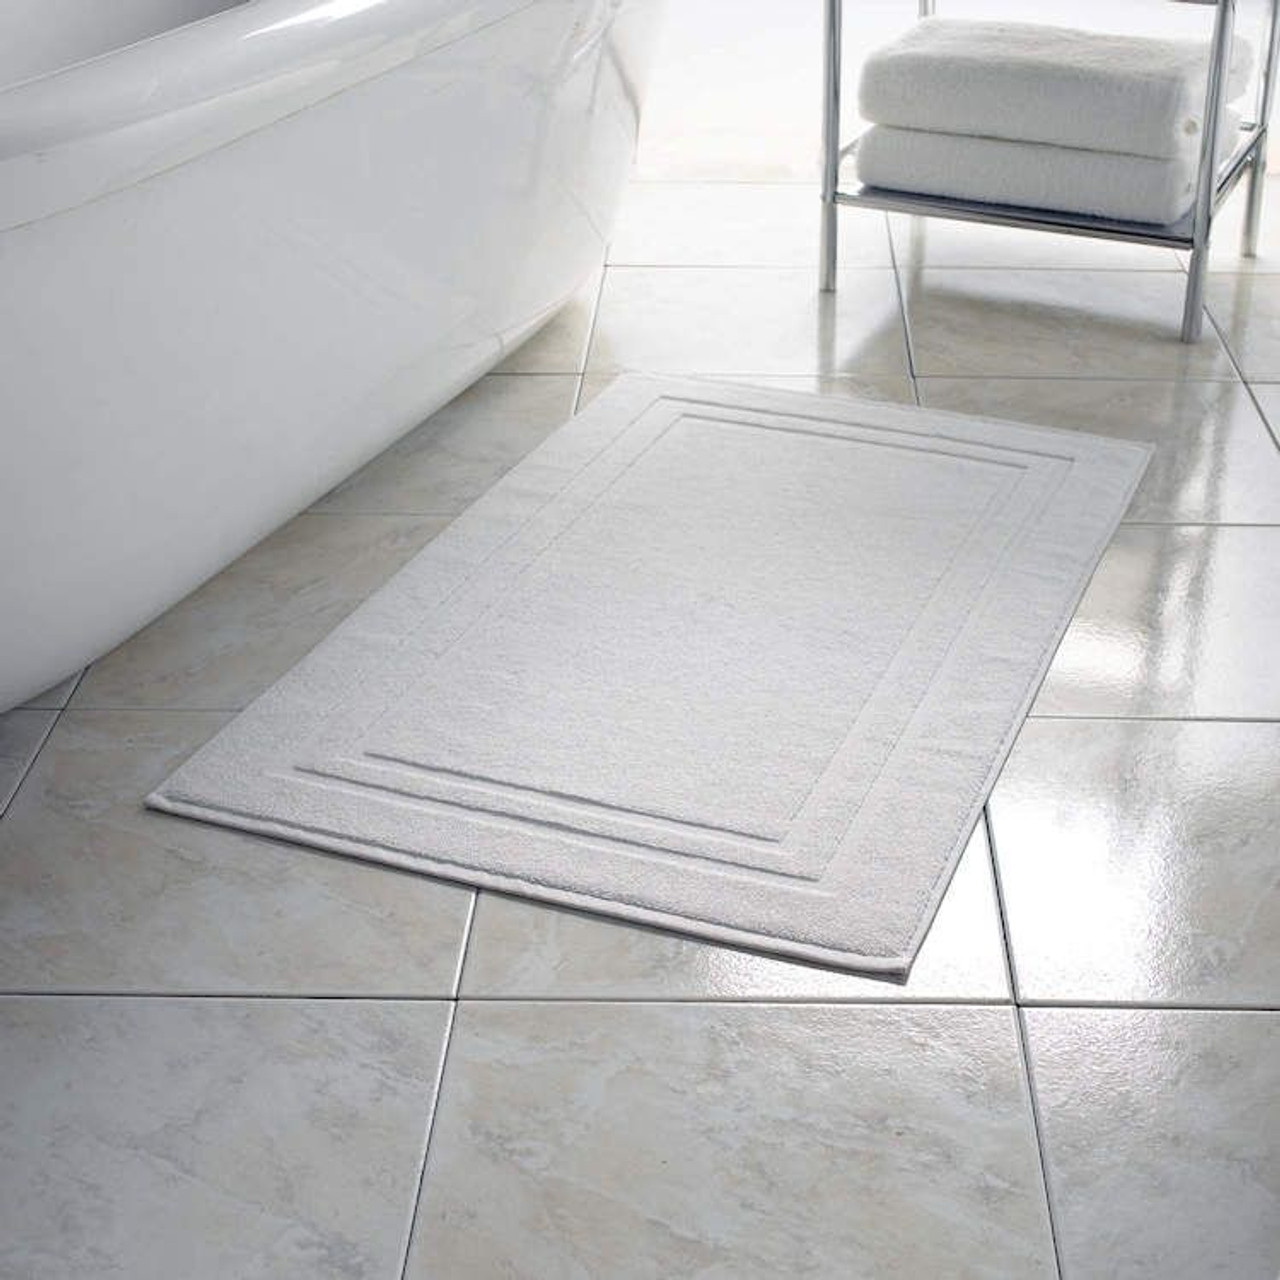 Hotel towels – 100% cotton economical bath Mats or Rugs for bathroom floor  – Terry towel manufacturer